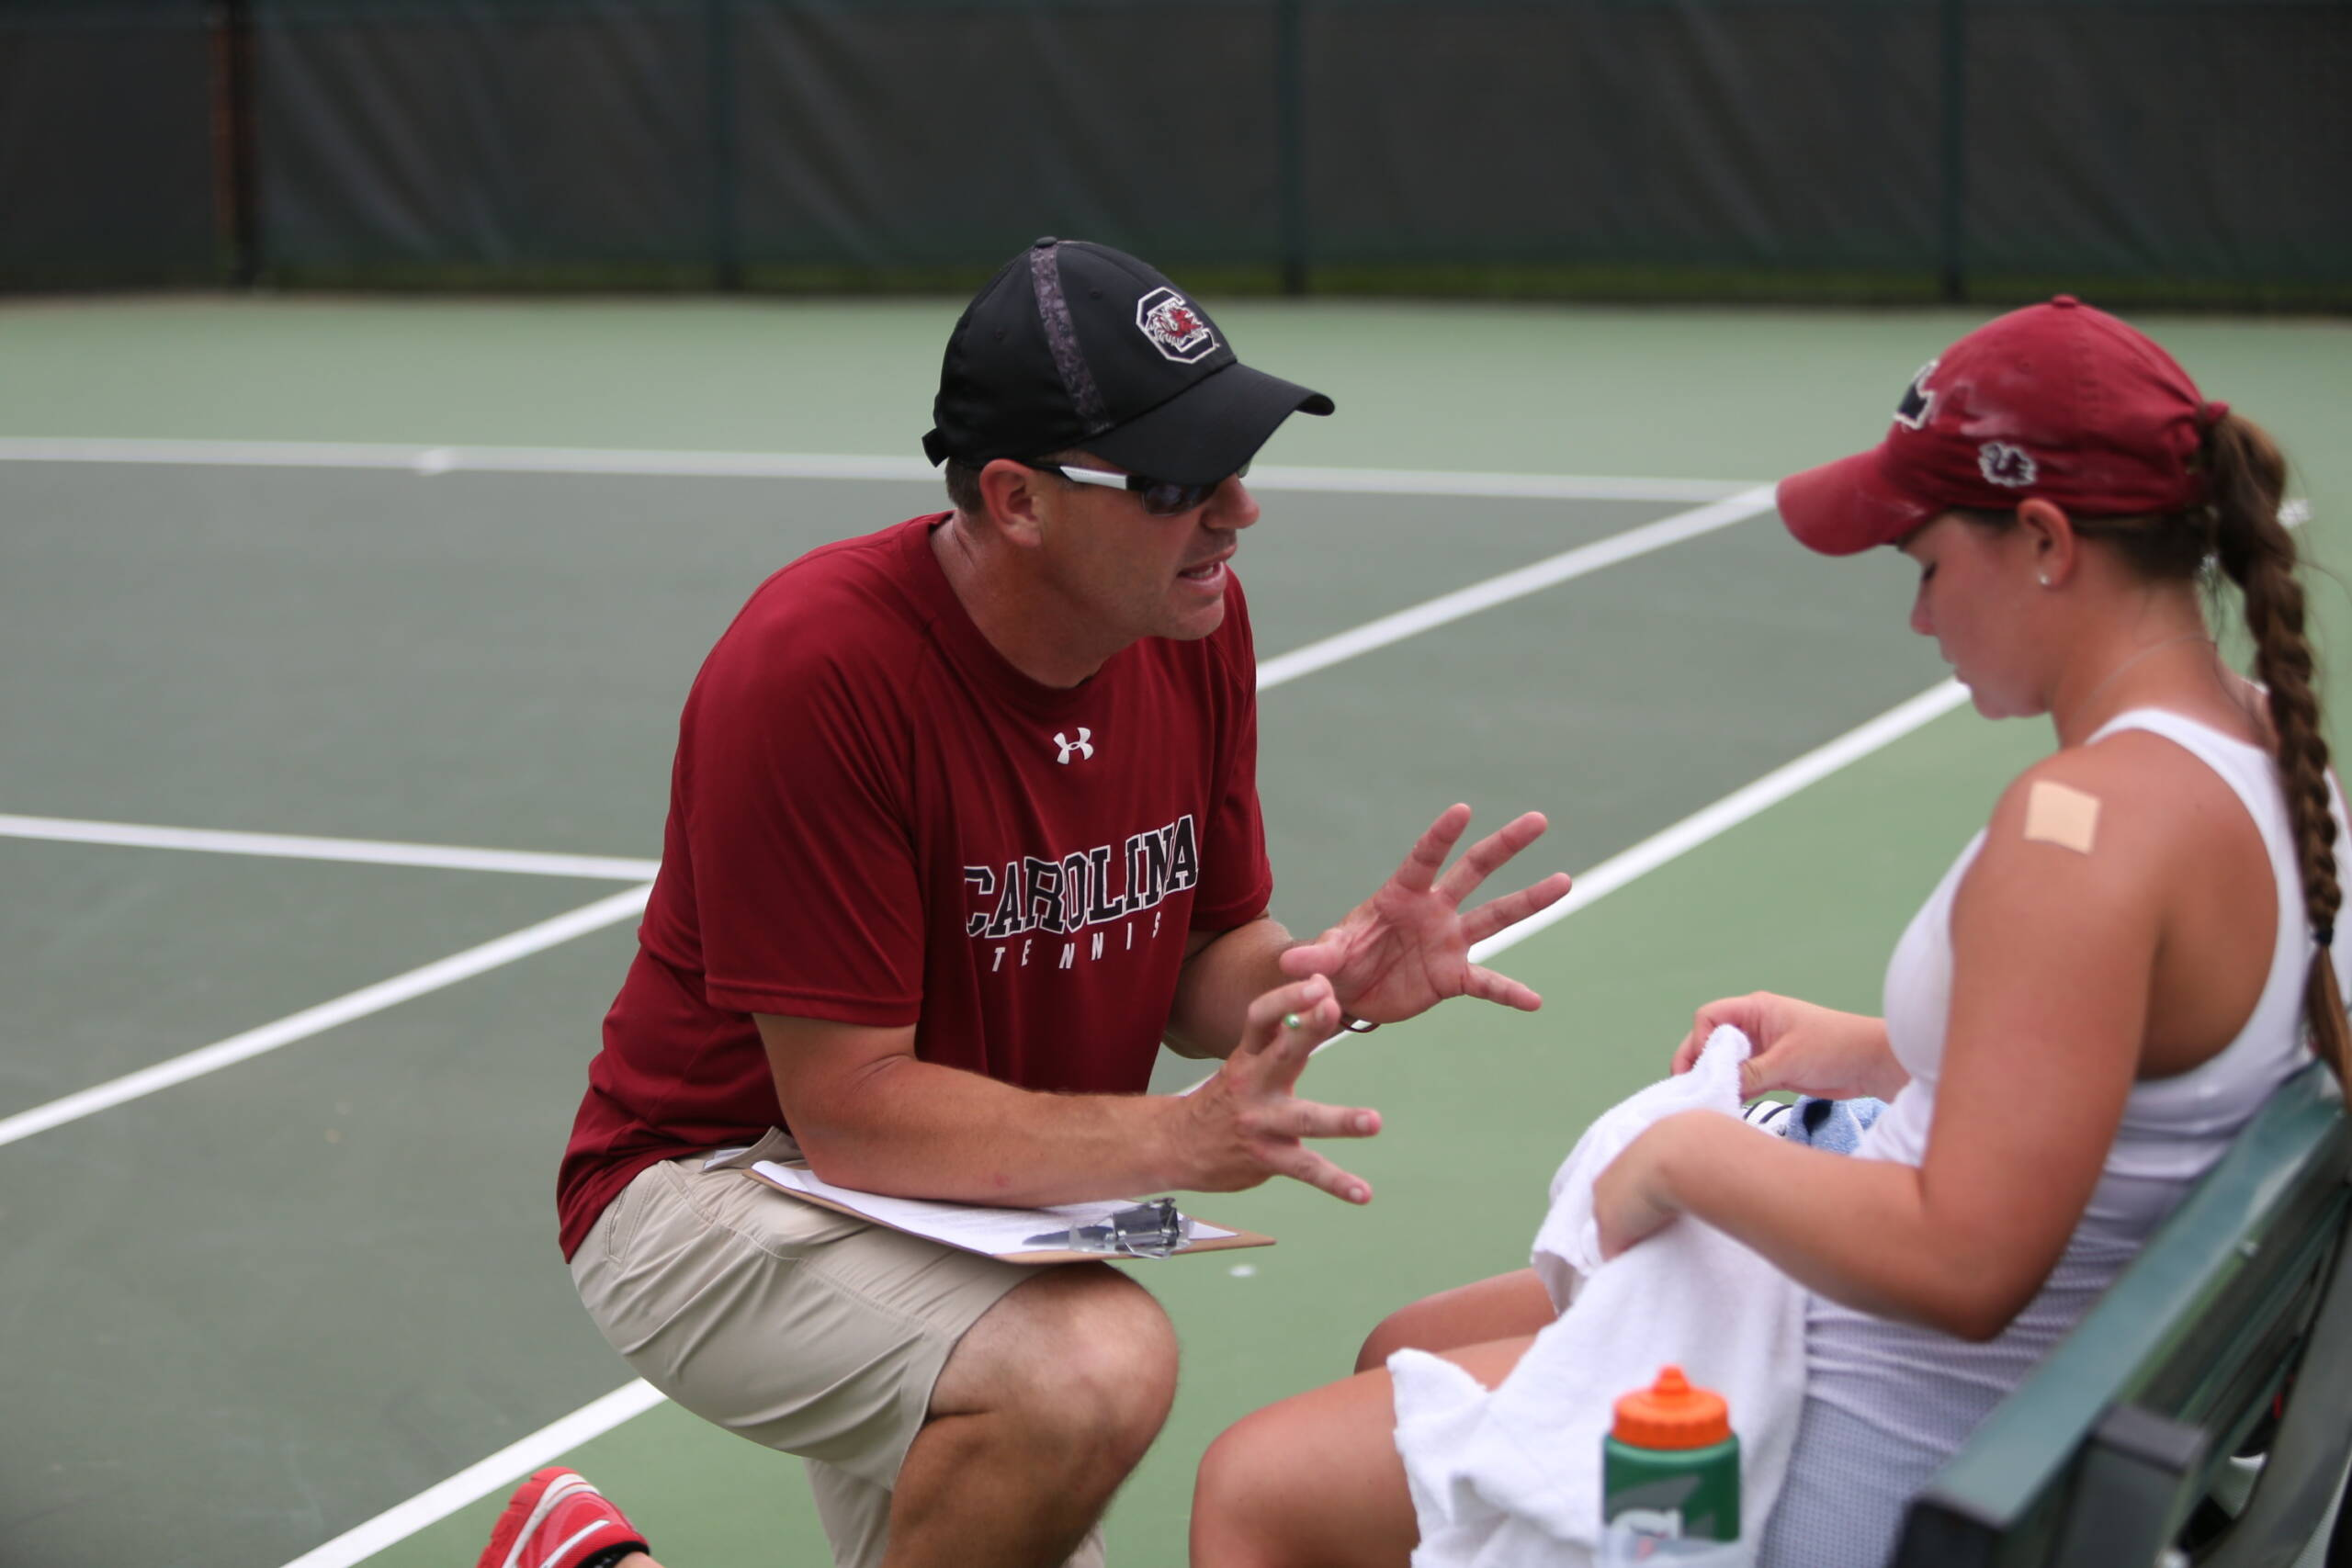 South Carolina Coach Influenced and Mentored by Billie Jean King